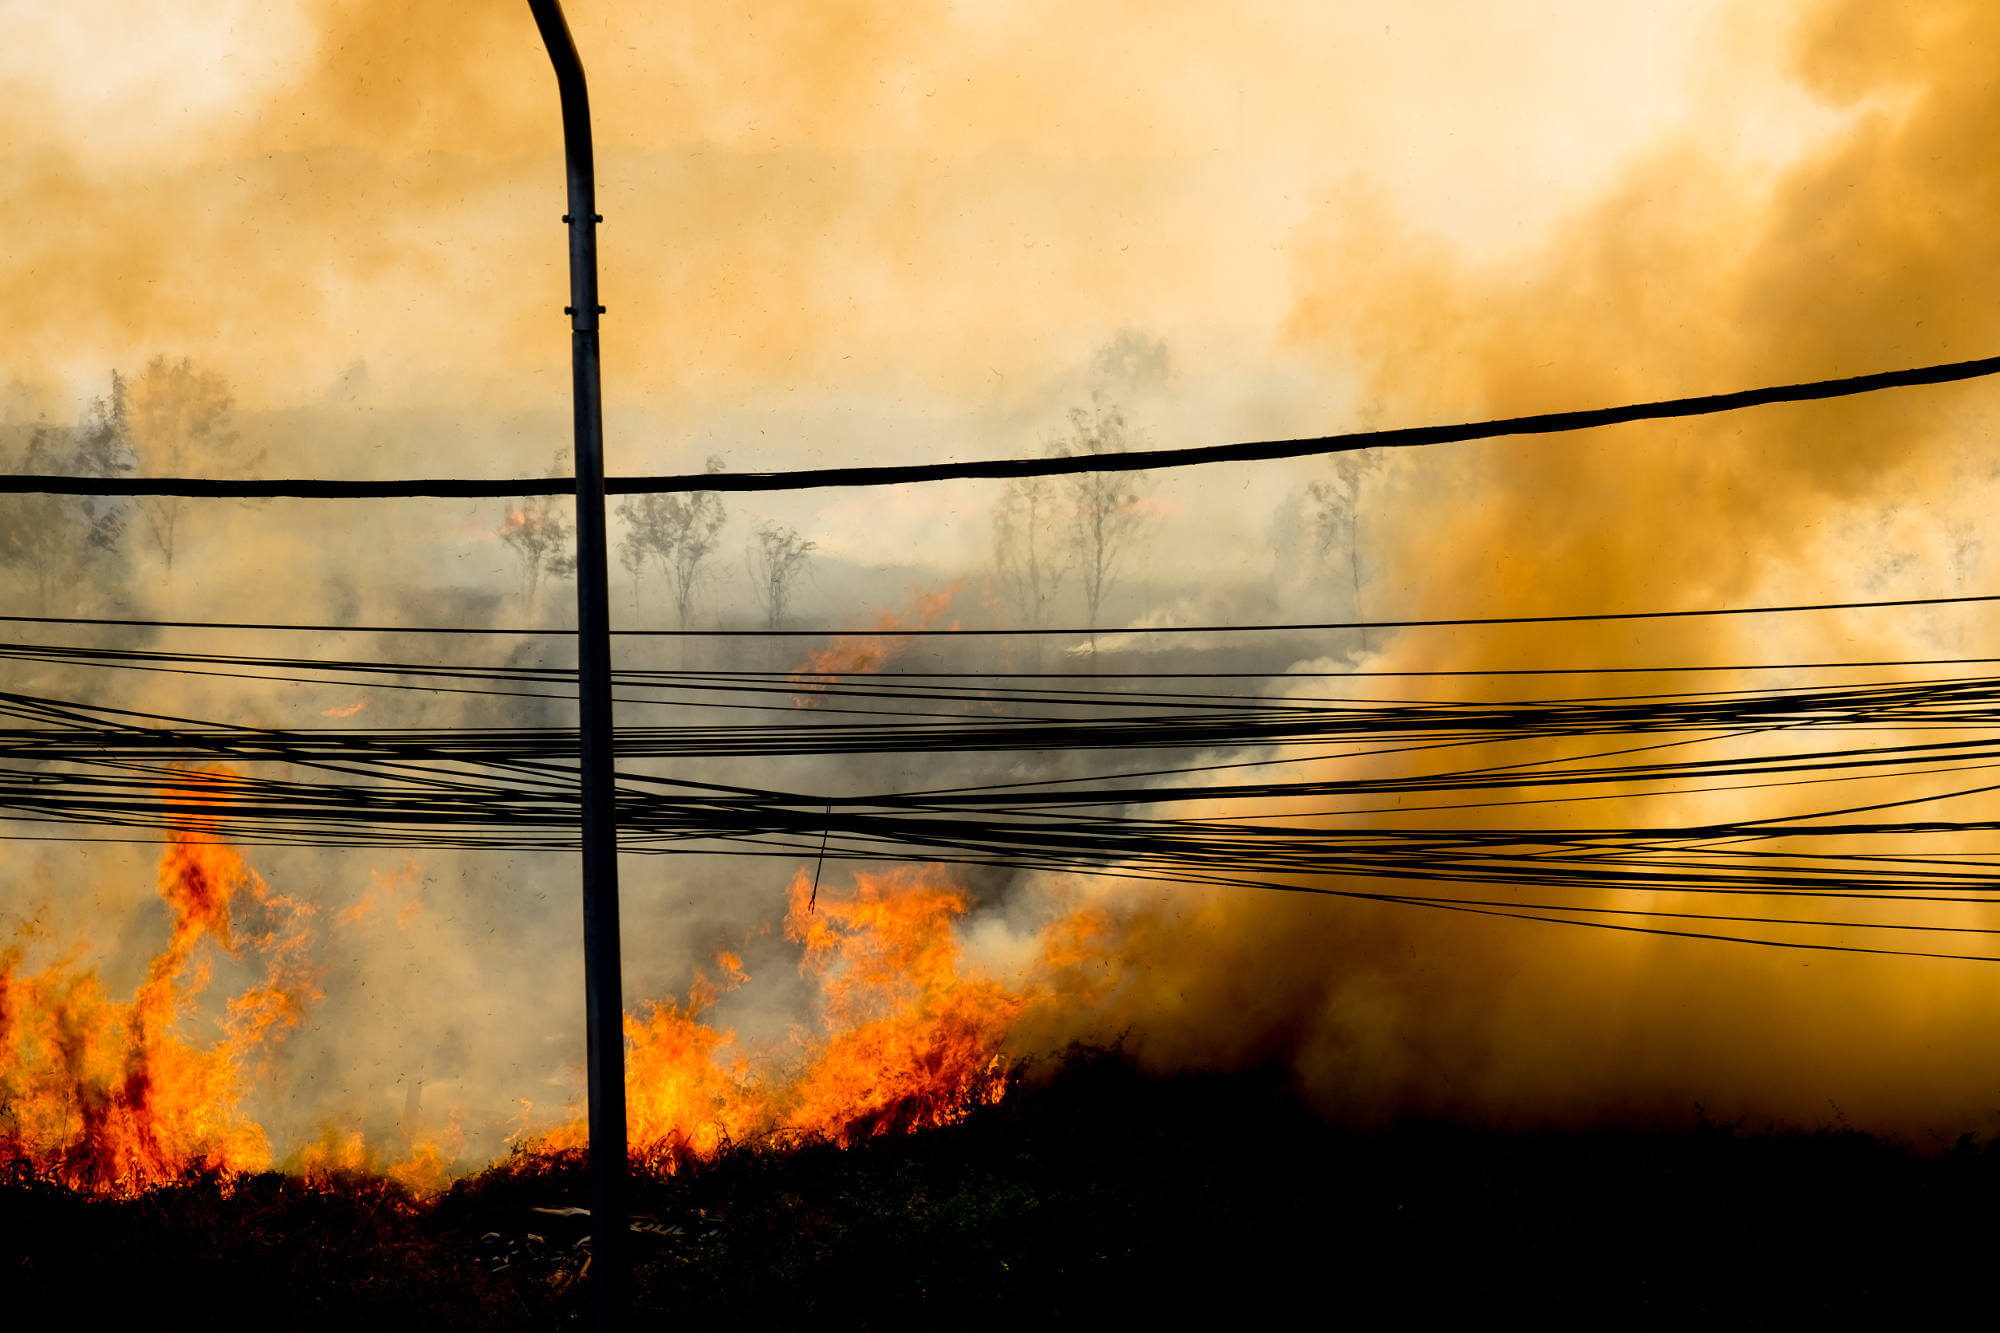 Wildefire at side of road, beneath power lines